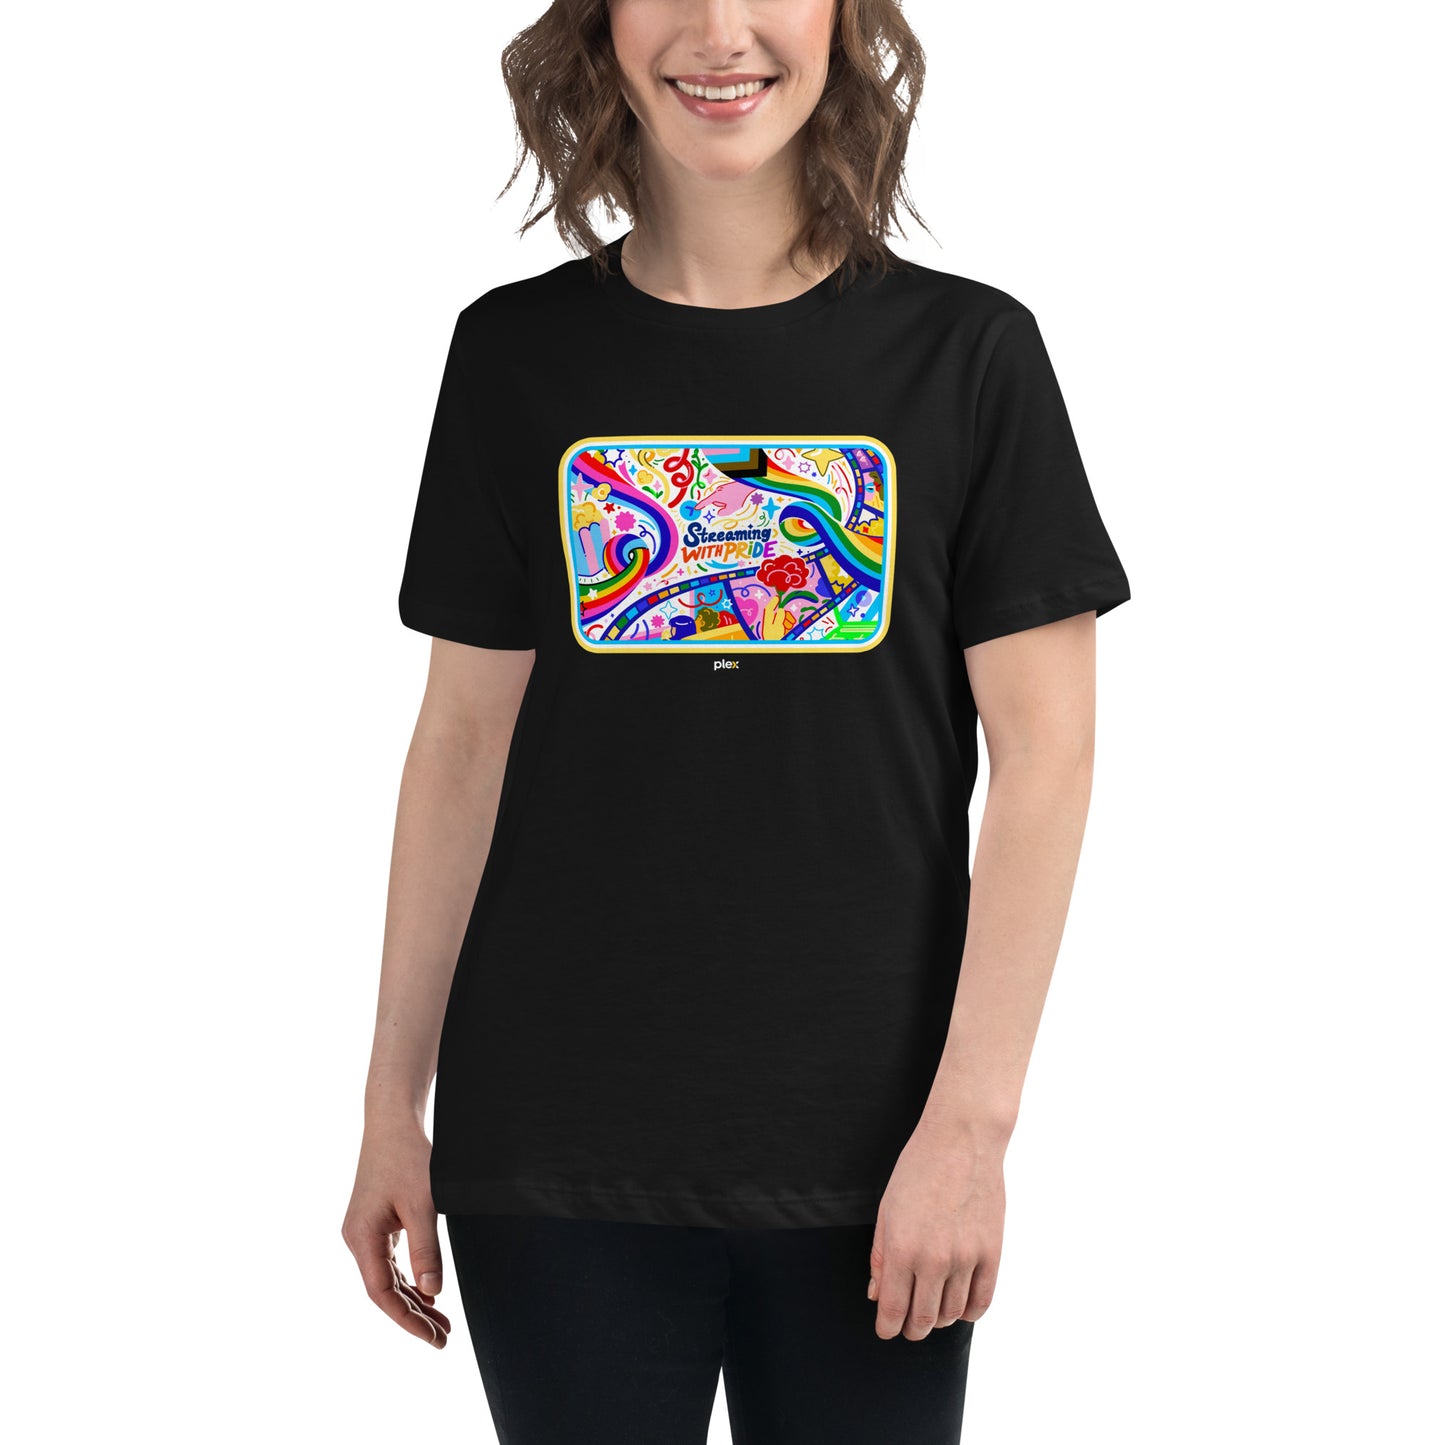 Women's Streaming with Pride T-Shirt